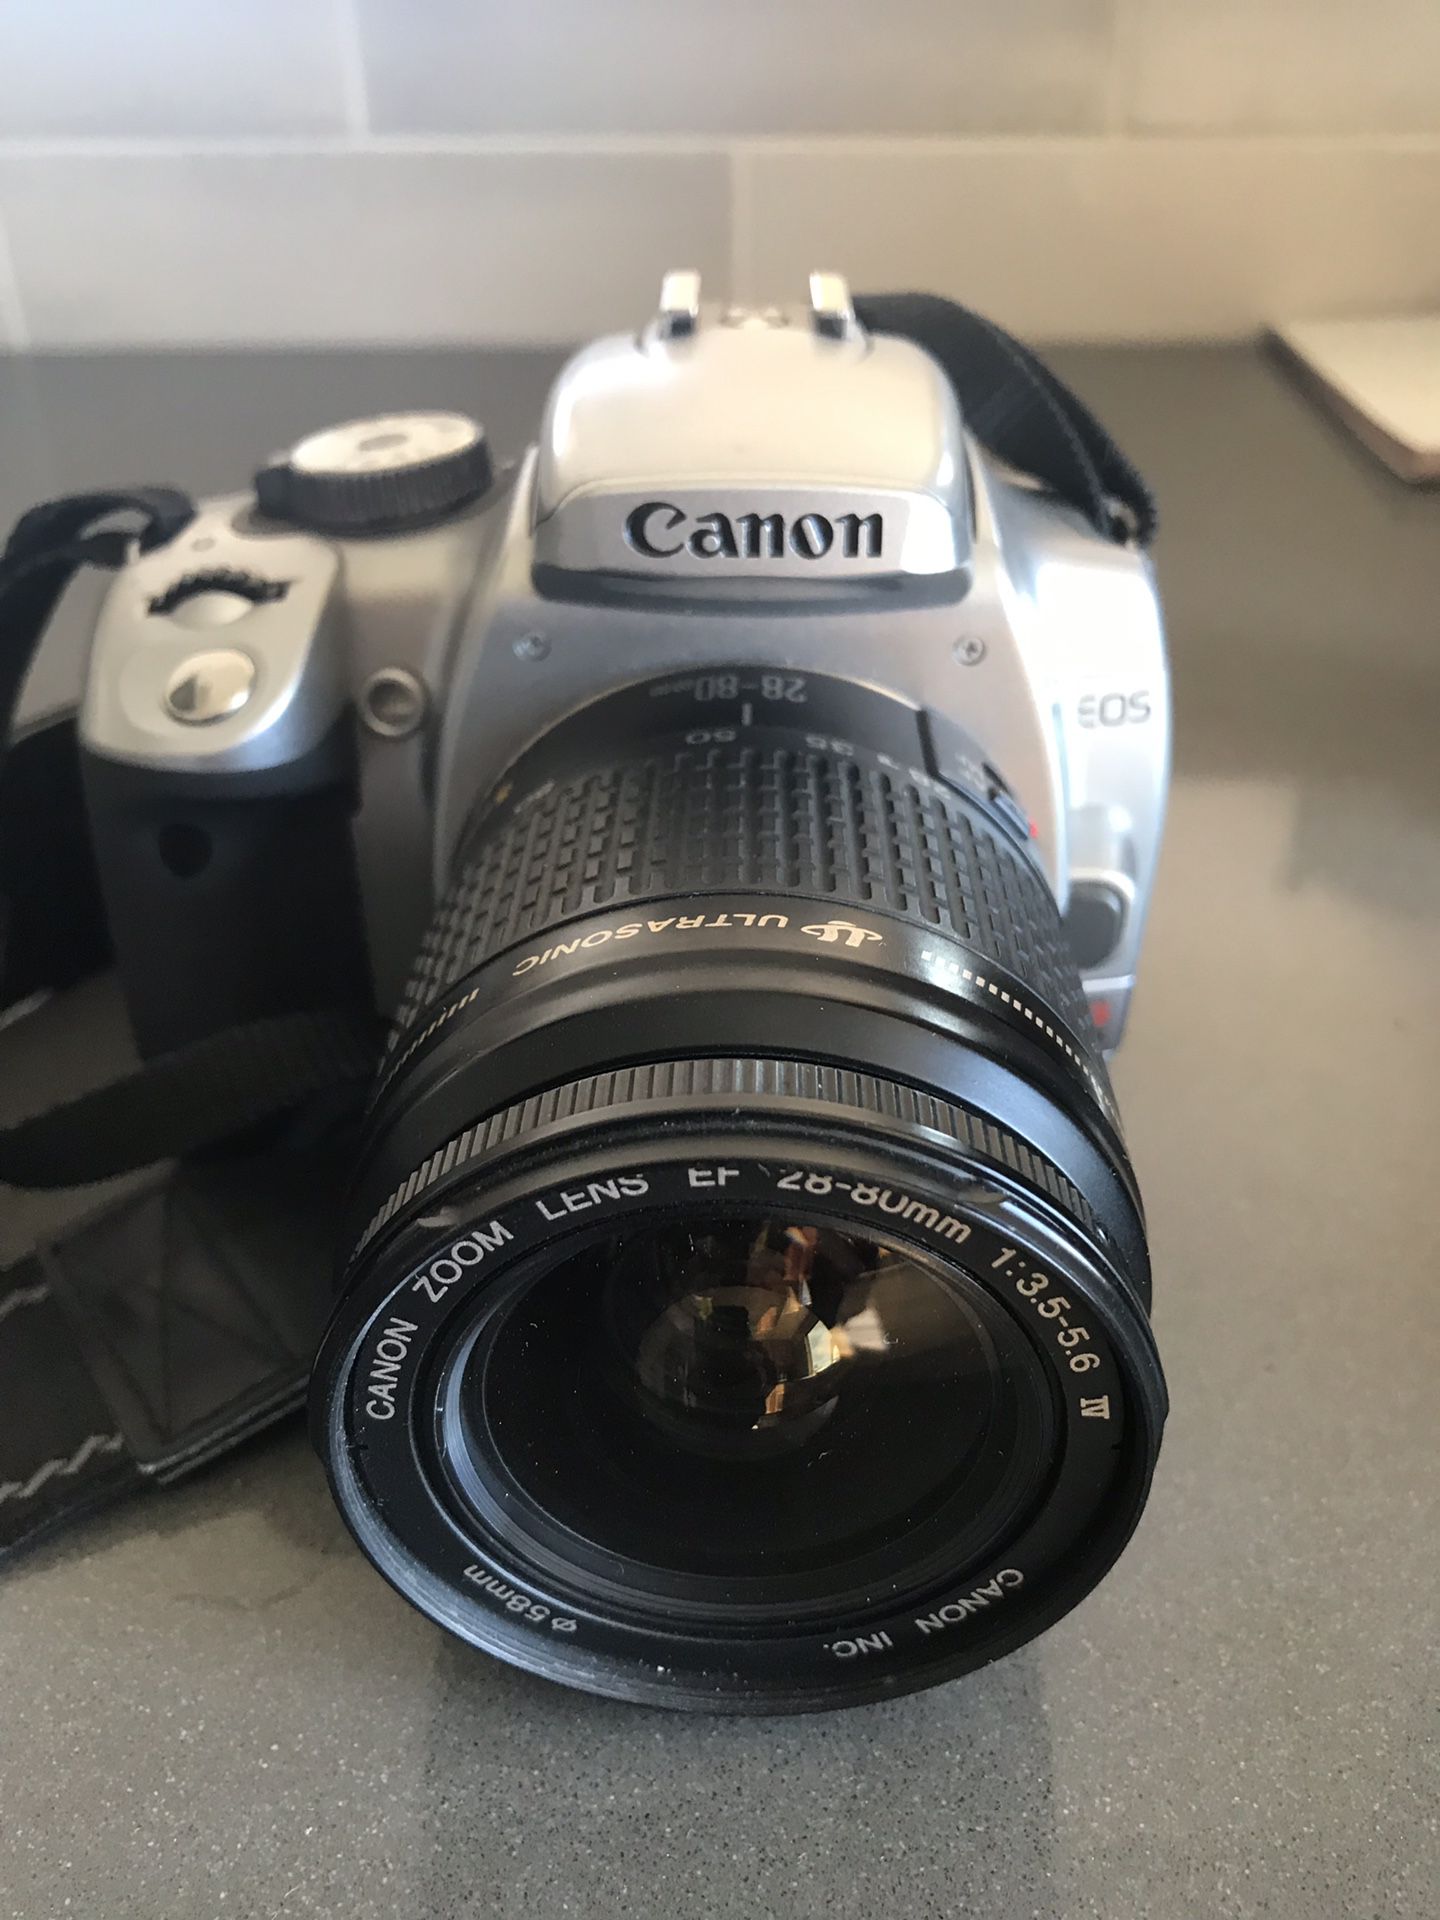 Canon Rebel Xti Includes Camera Body 2 Canon Lenses 28 80 Lens 75 300 Lens Battery And Charger For Sale In Leeds Ut Offerup